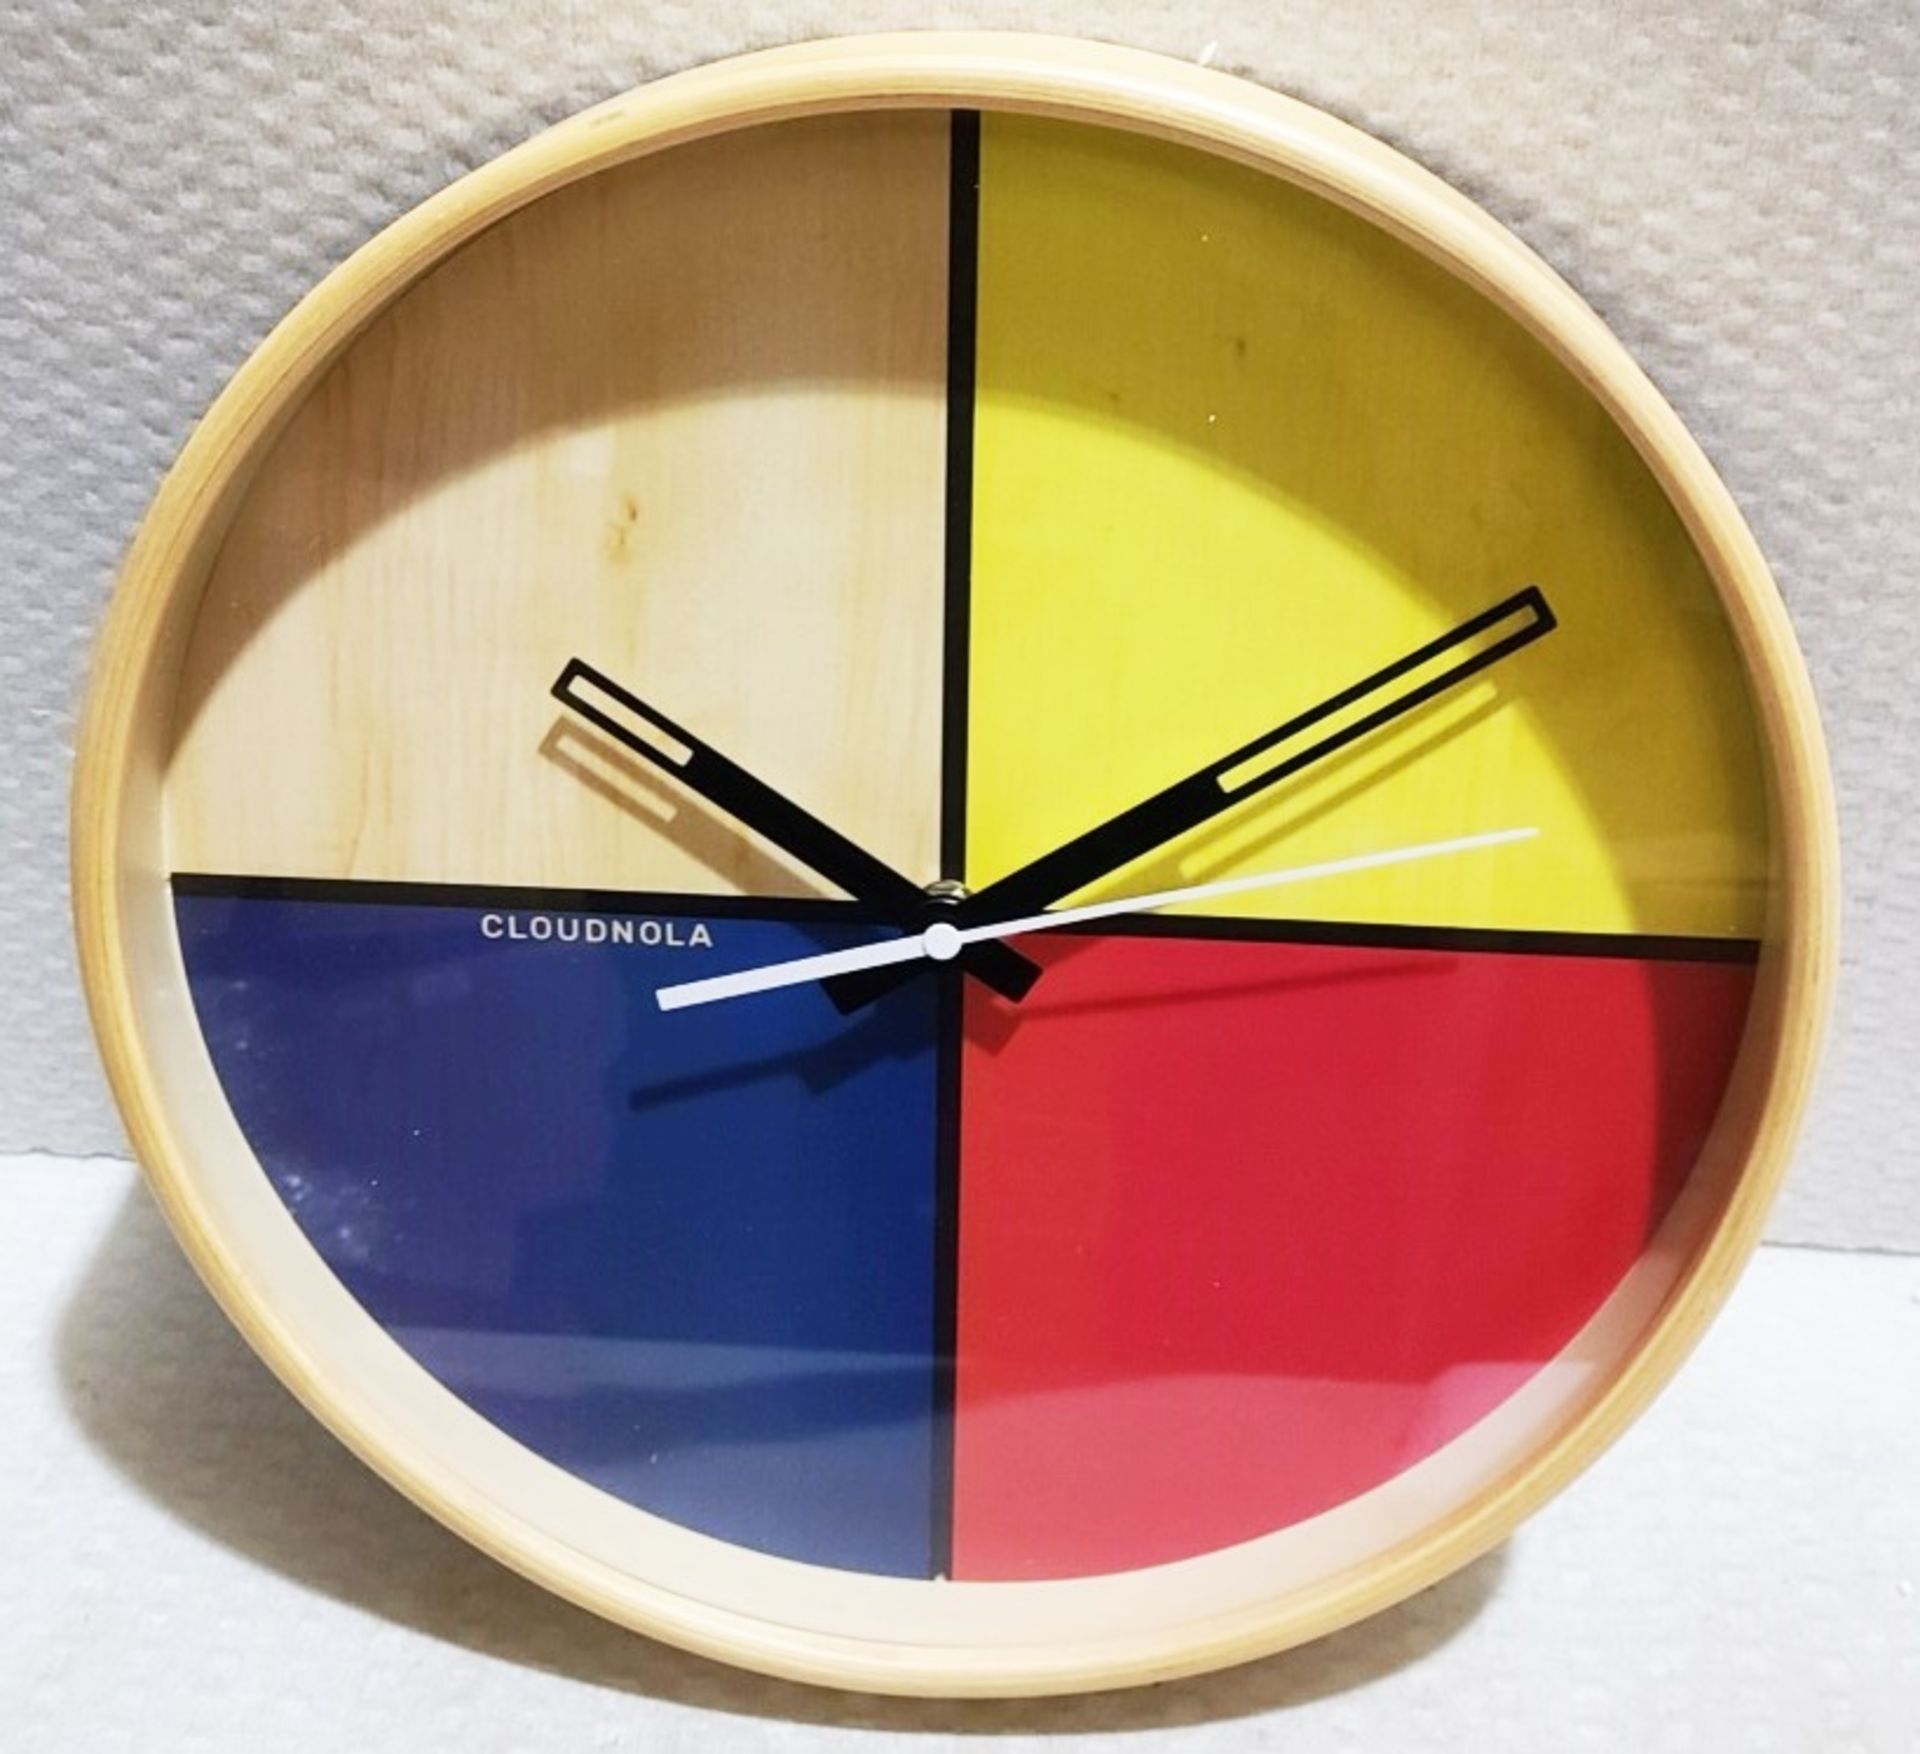 1 x CLOUDNOLA Contemporary Flur Yellow, Red, Blue & Birch Wall Clock With Offset Wooden Rim 30cm - Image 5 of 8